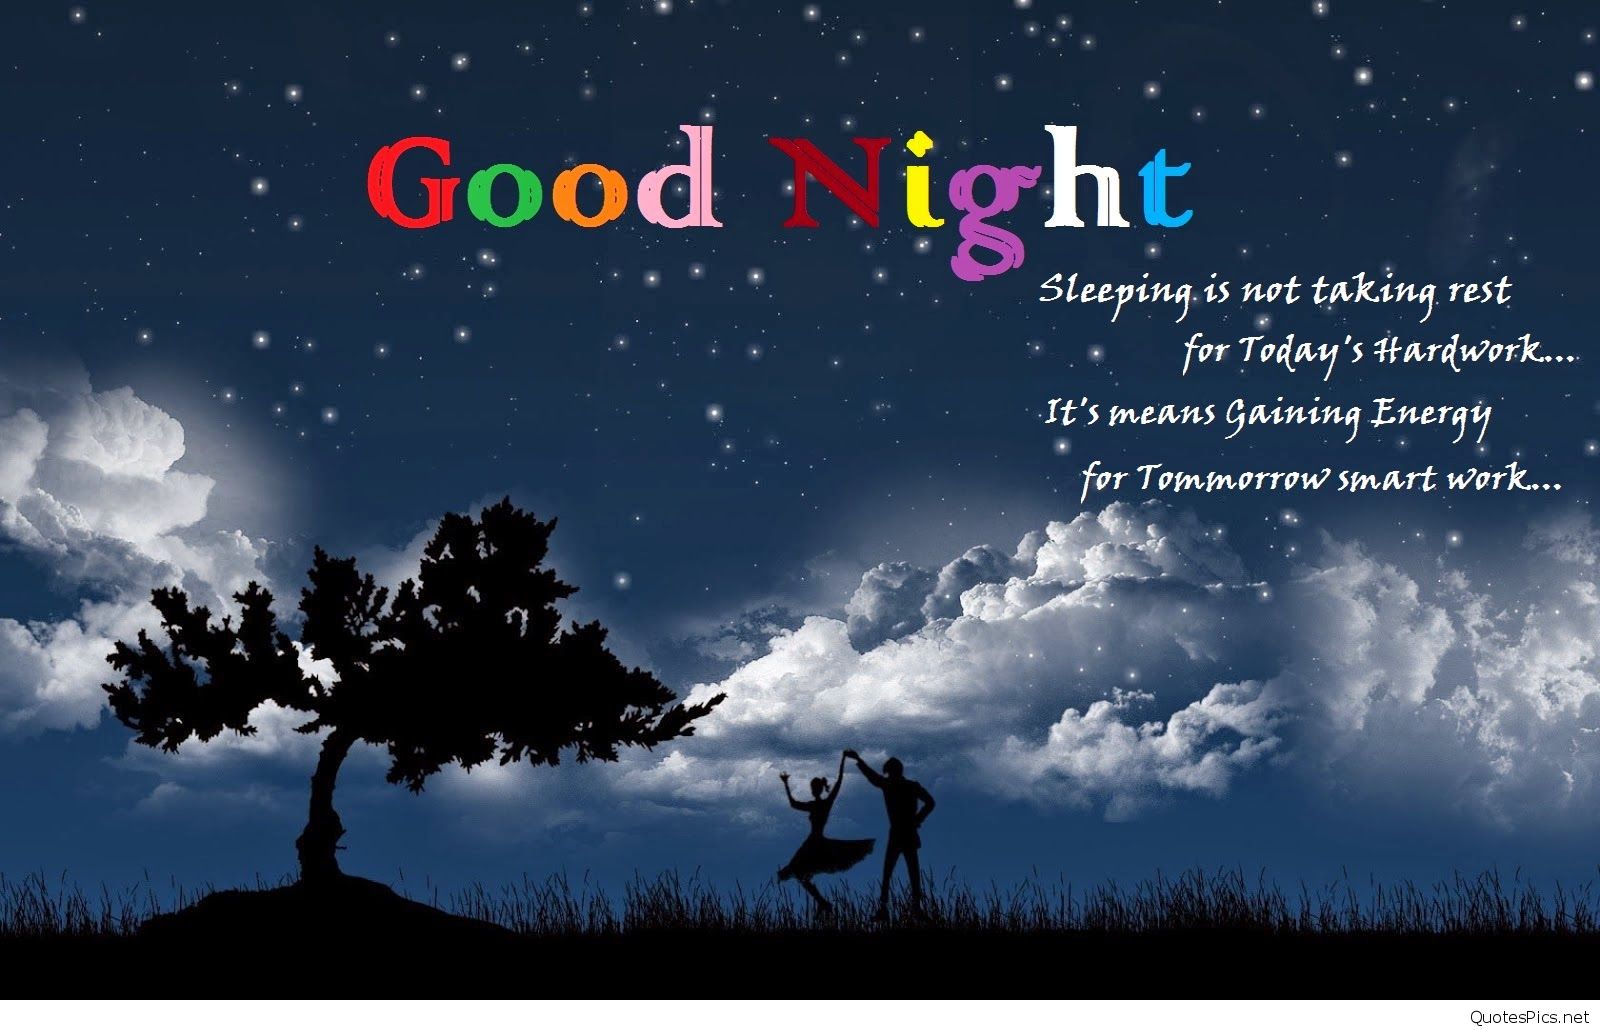 new good night wallpaper,sky,nature,natural landscape,text,atmosphere